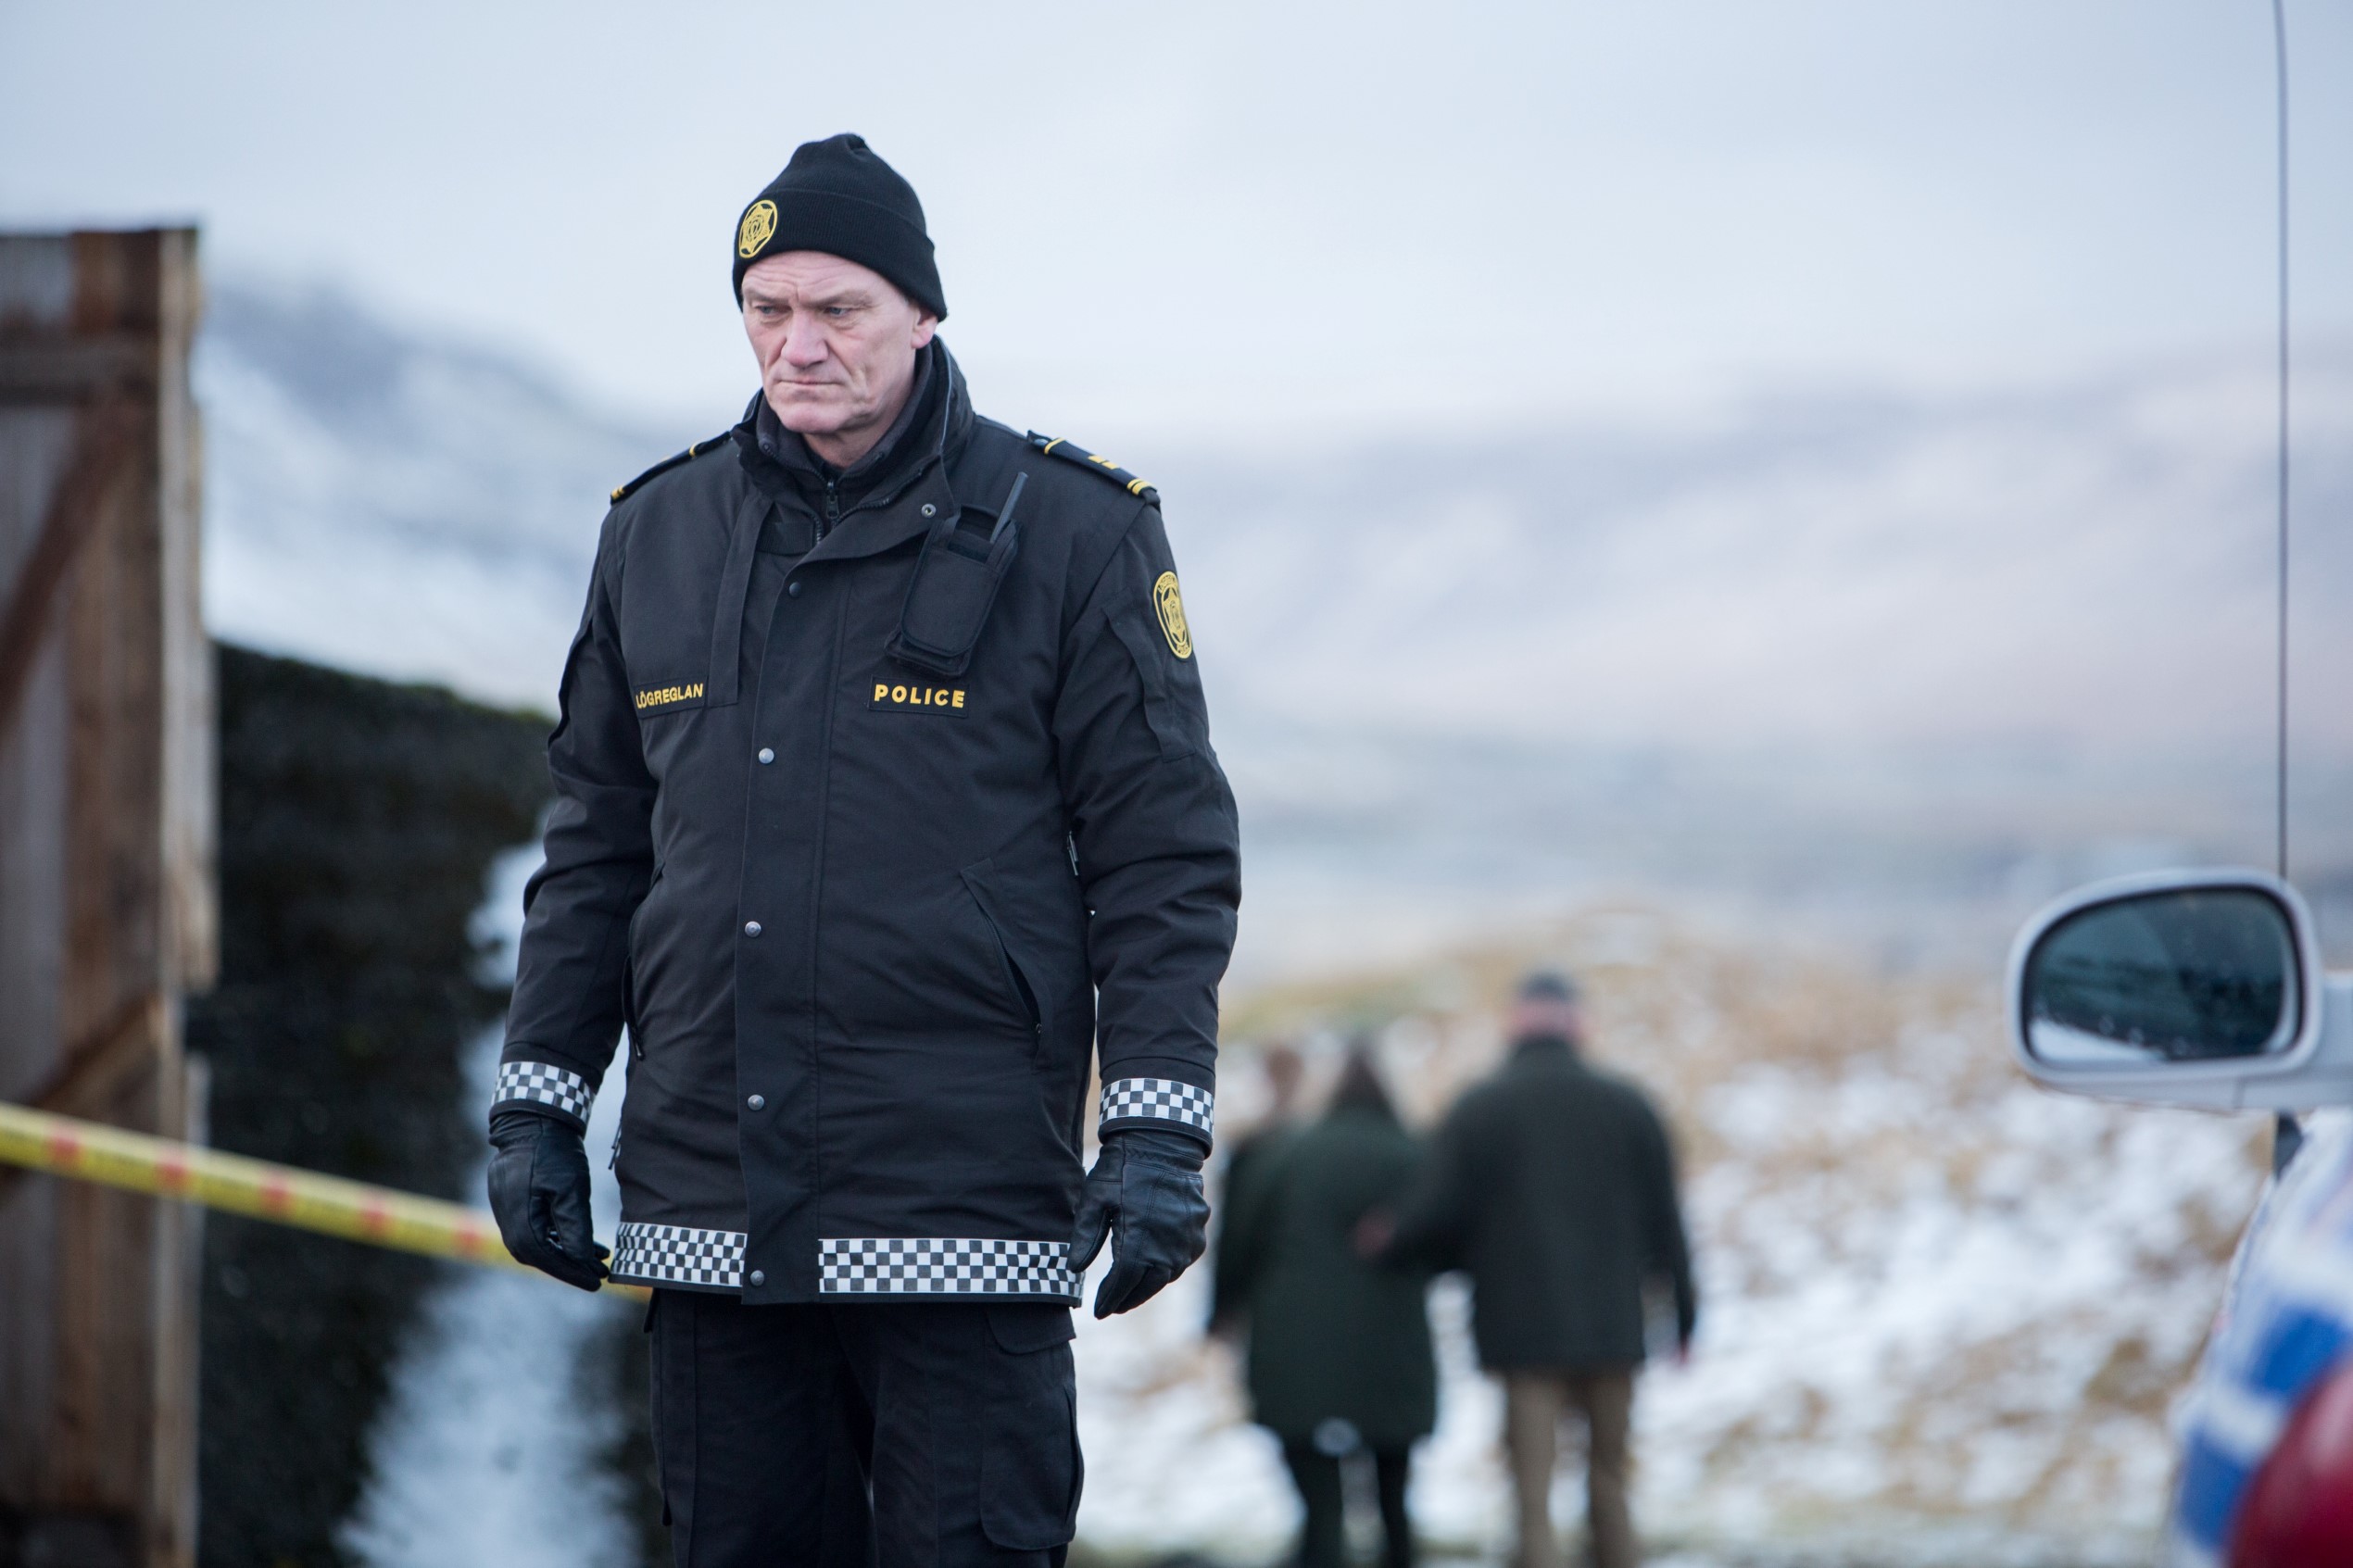 Ingvar Sigurðsson in police uniform in a scene from TV series Trapped